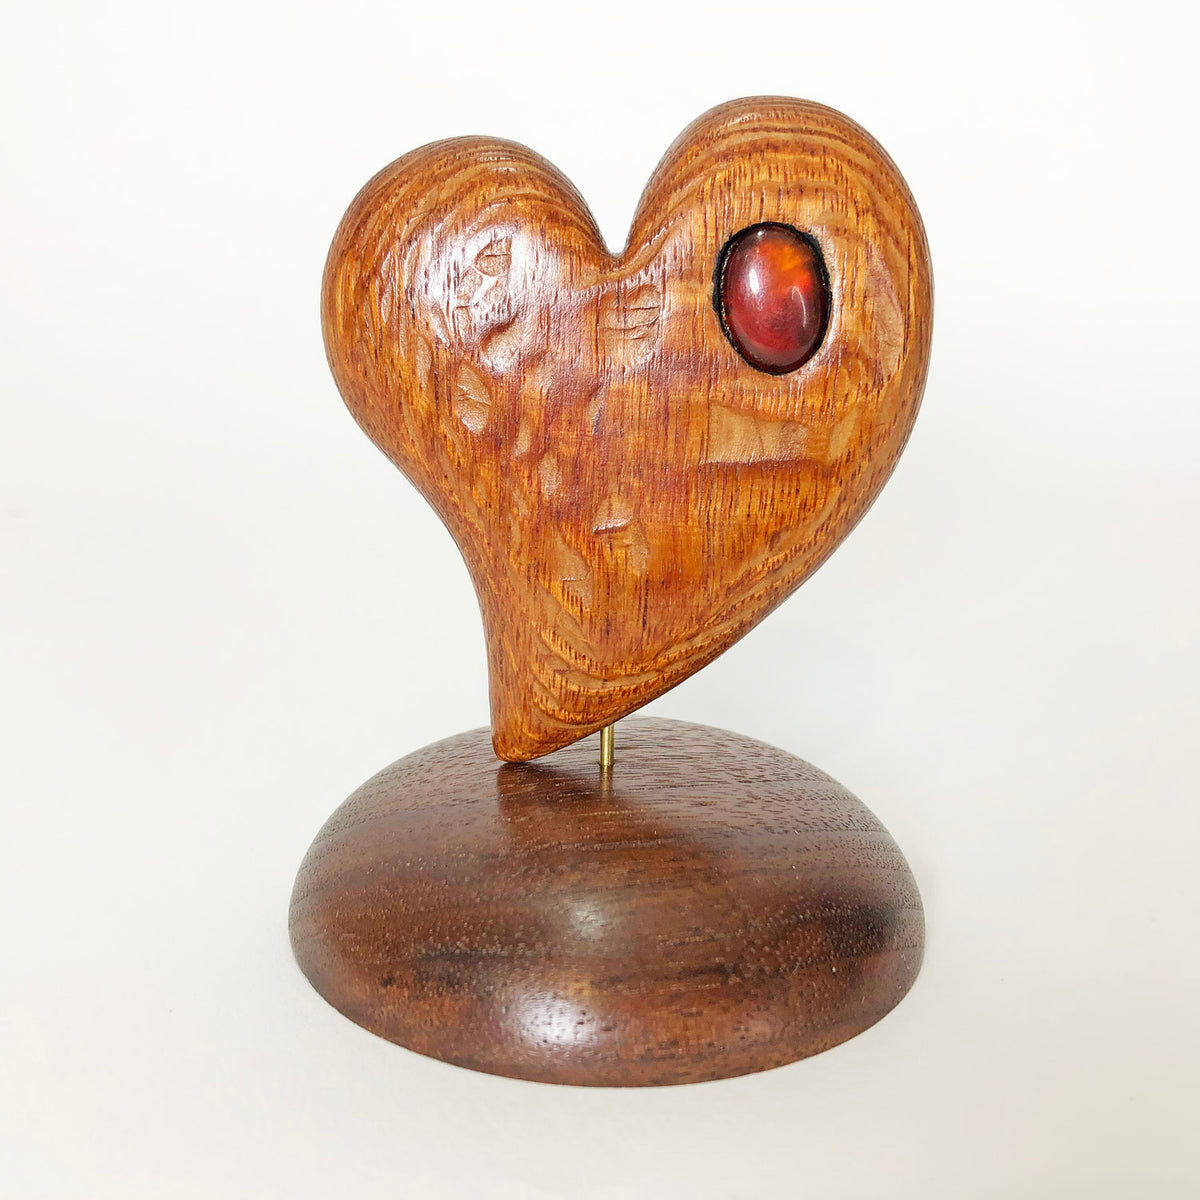 Wood Carved Heart – 12timbers